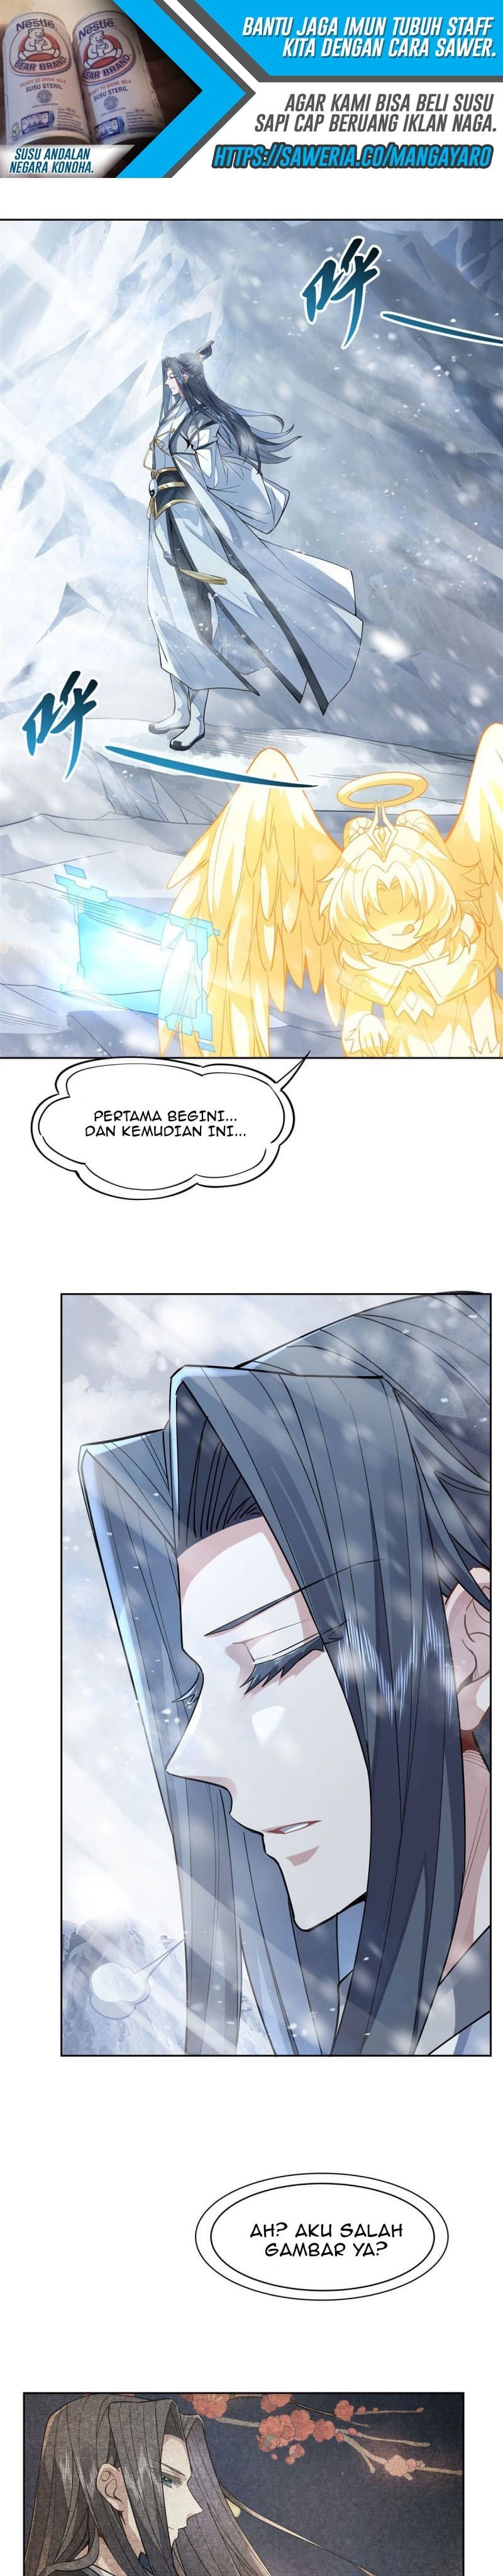 Dilarang COPAS - situs resmi www.mangacanblog.com - Komik my female apprentices are all big shots from the future 037 - chapter 37 38 Indonesia my female apprentices are all big shots from the future 037 - chapter 37 Terbaru 10|Baca Manga Komik Indonesia|Mangacan